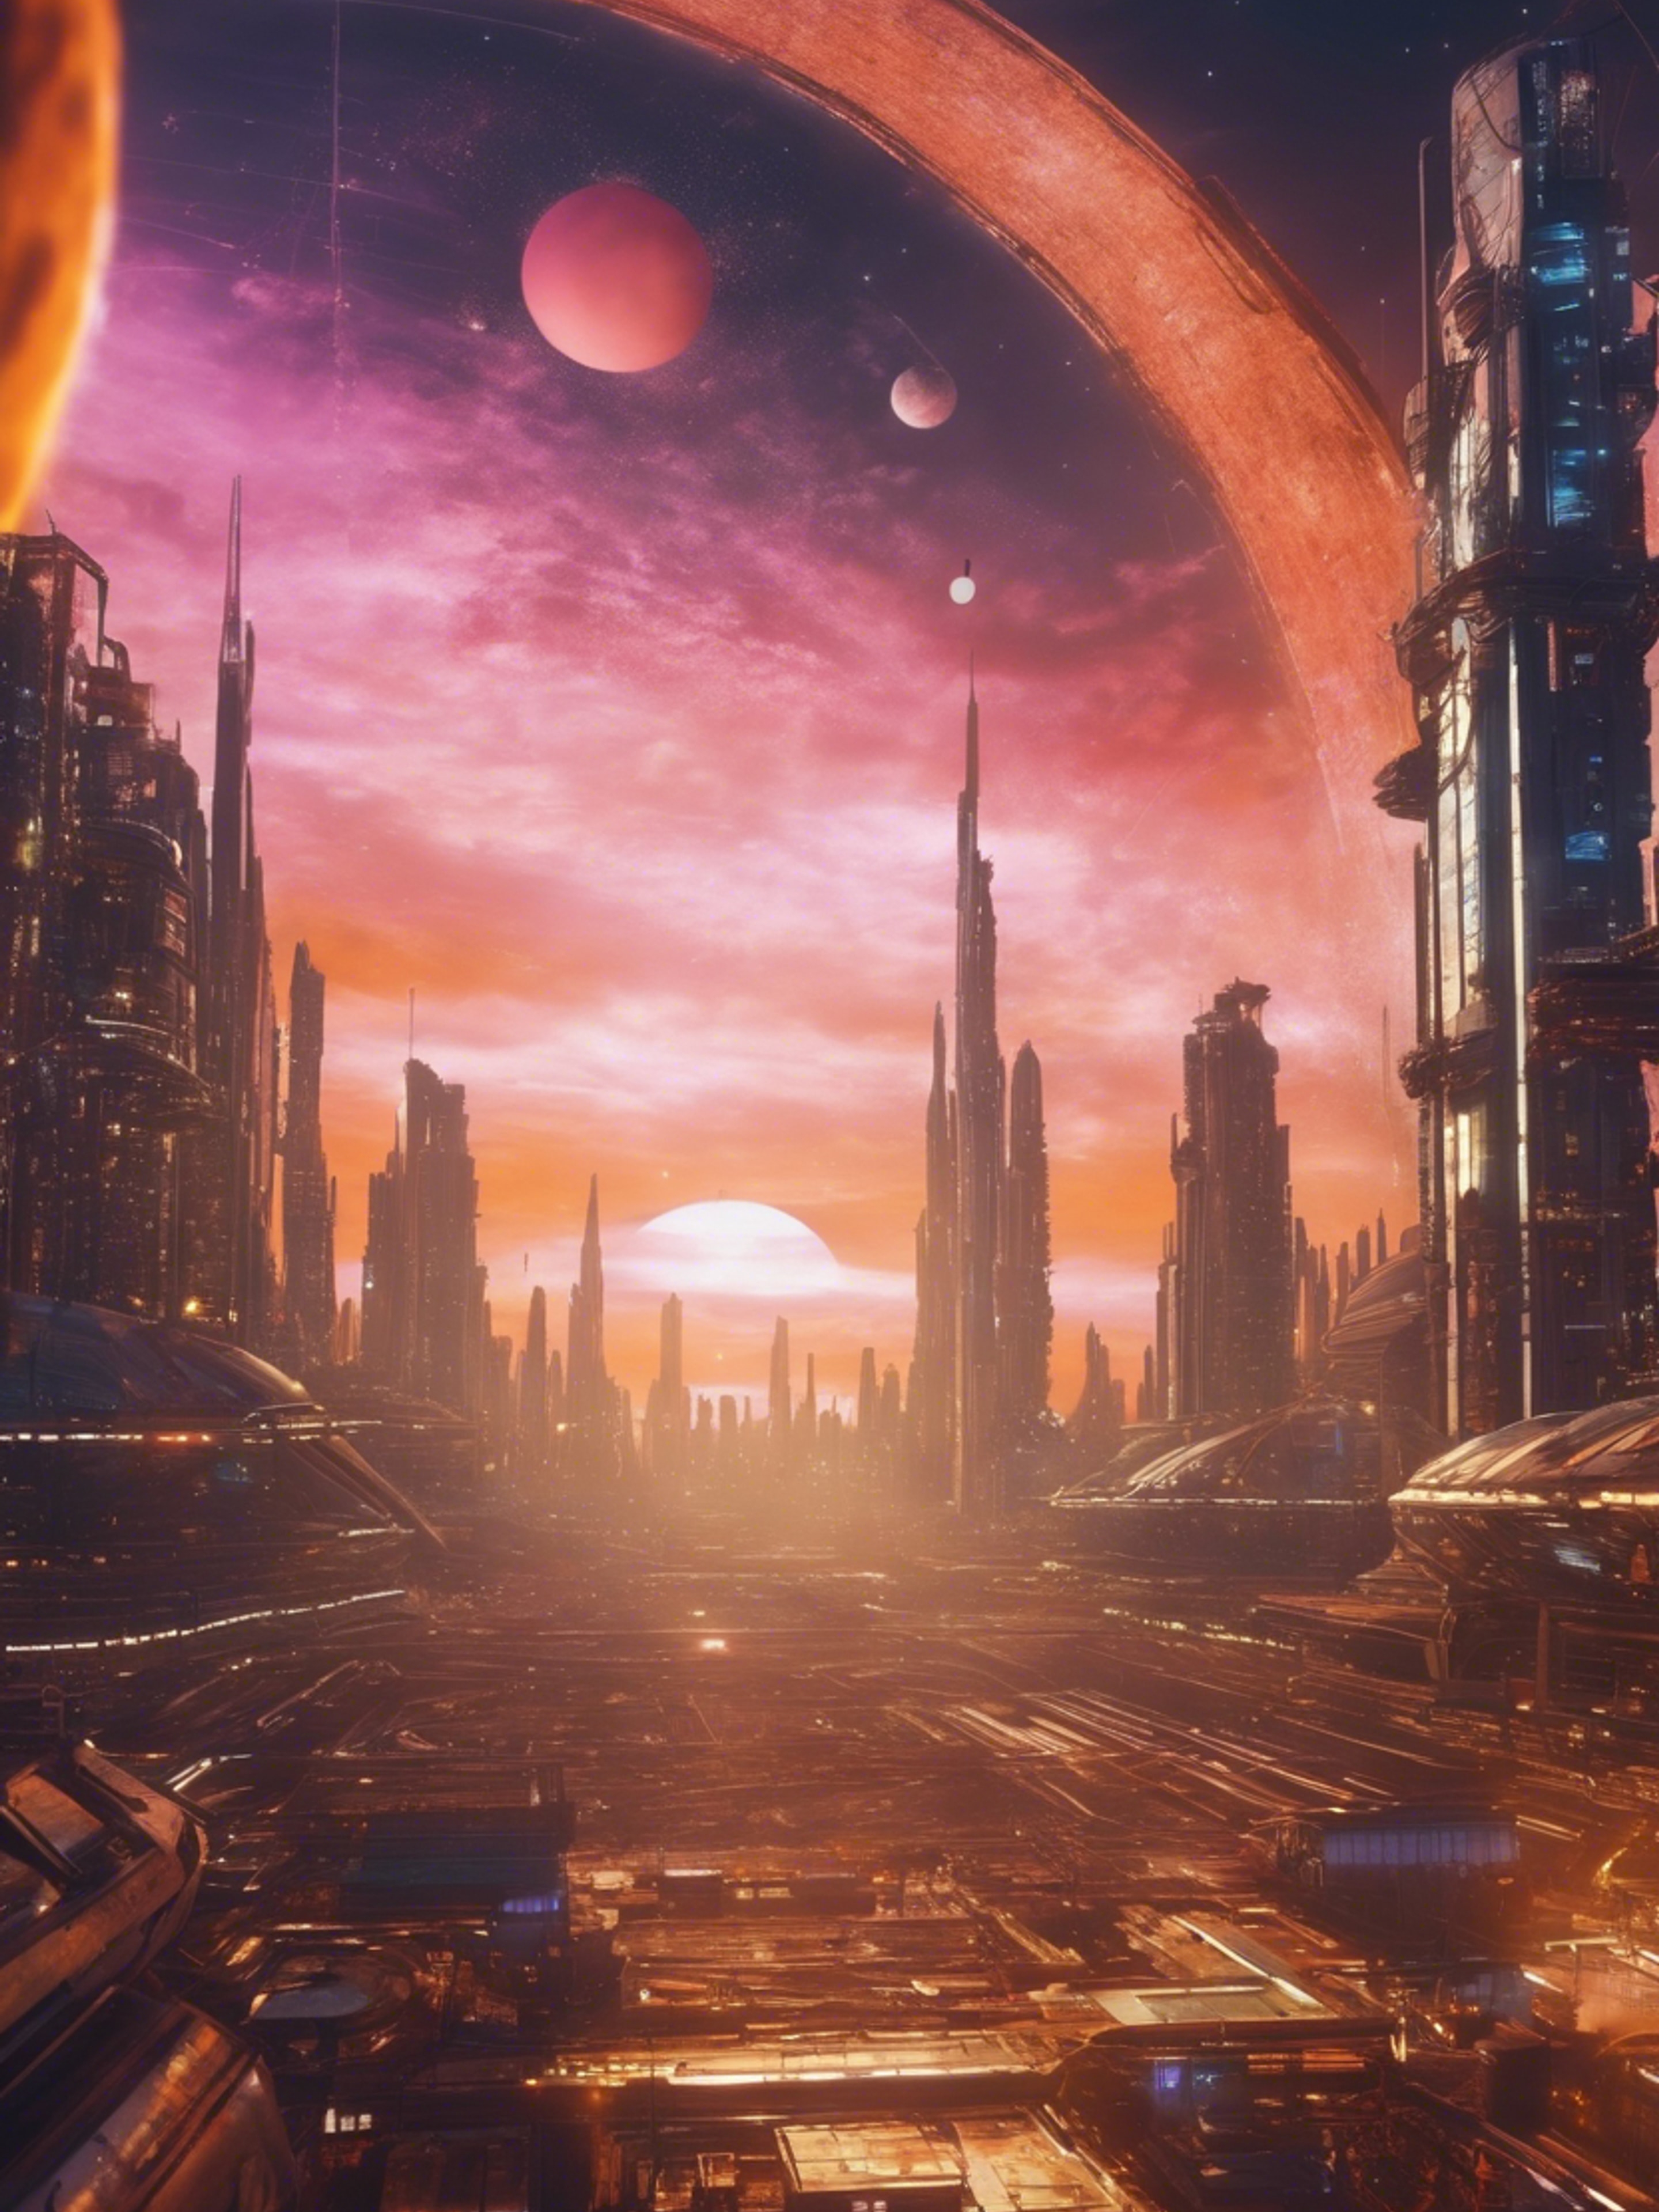 The surreal skyline of a space colony in a distant future over a alien sunset.壁紙[87718168372c42148109]